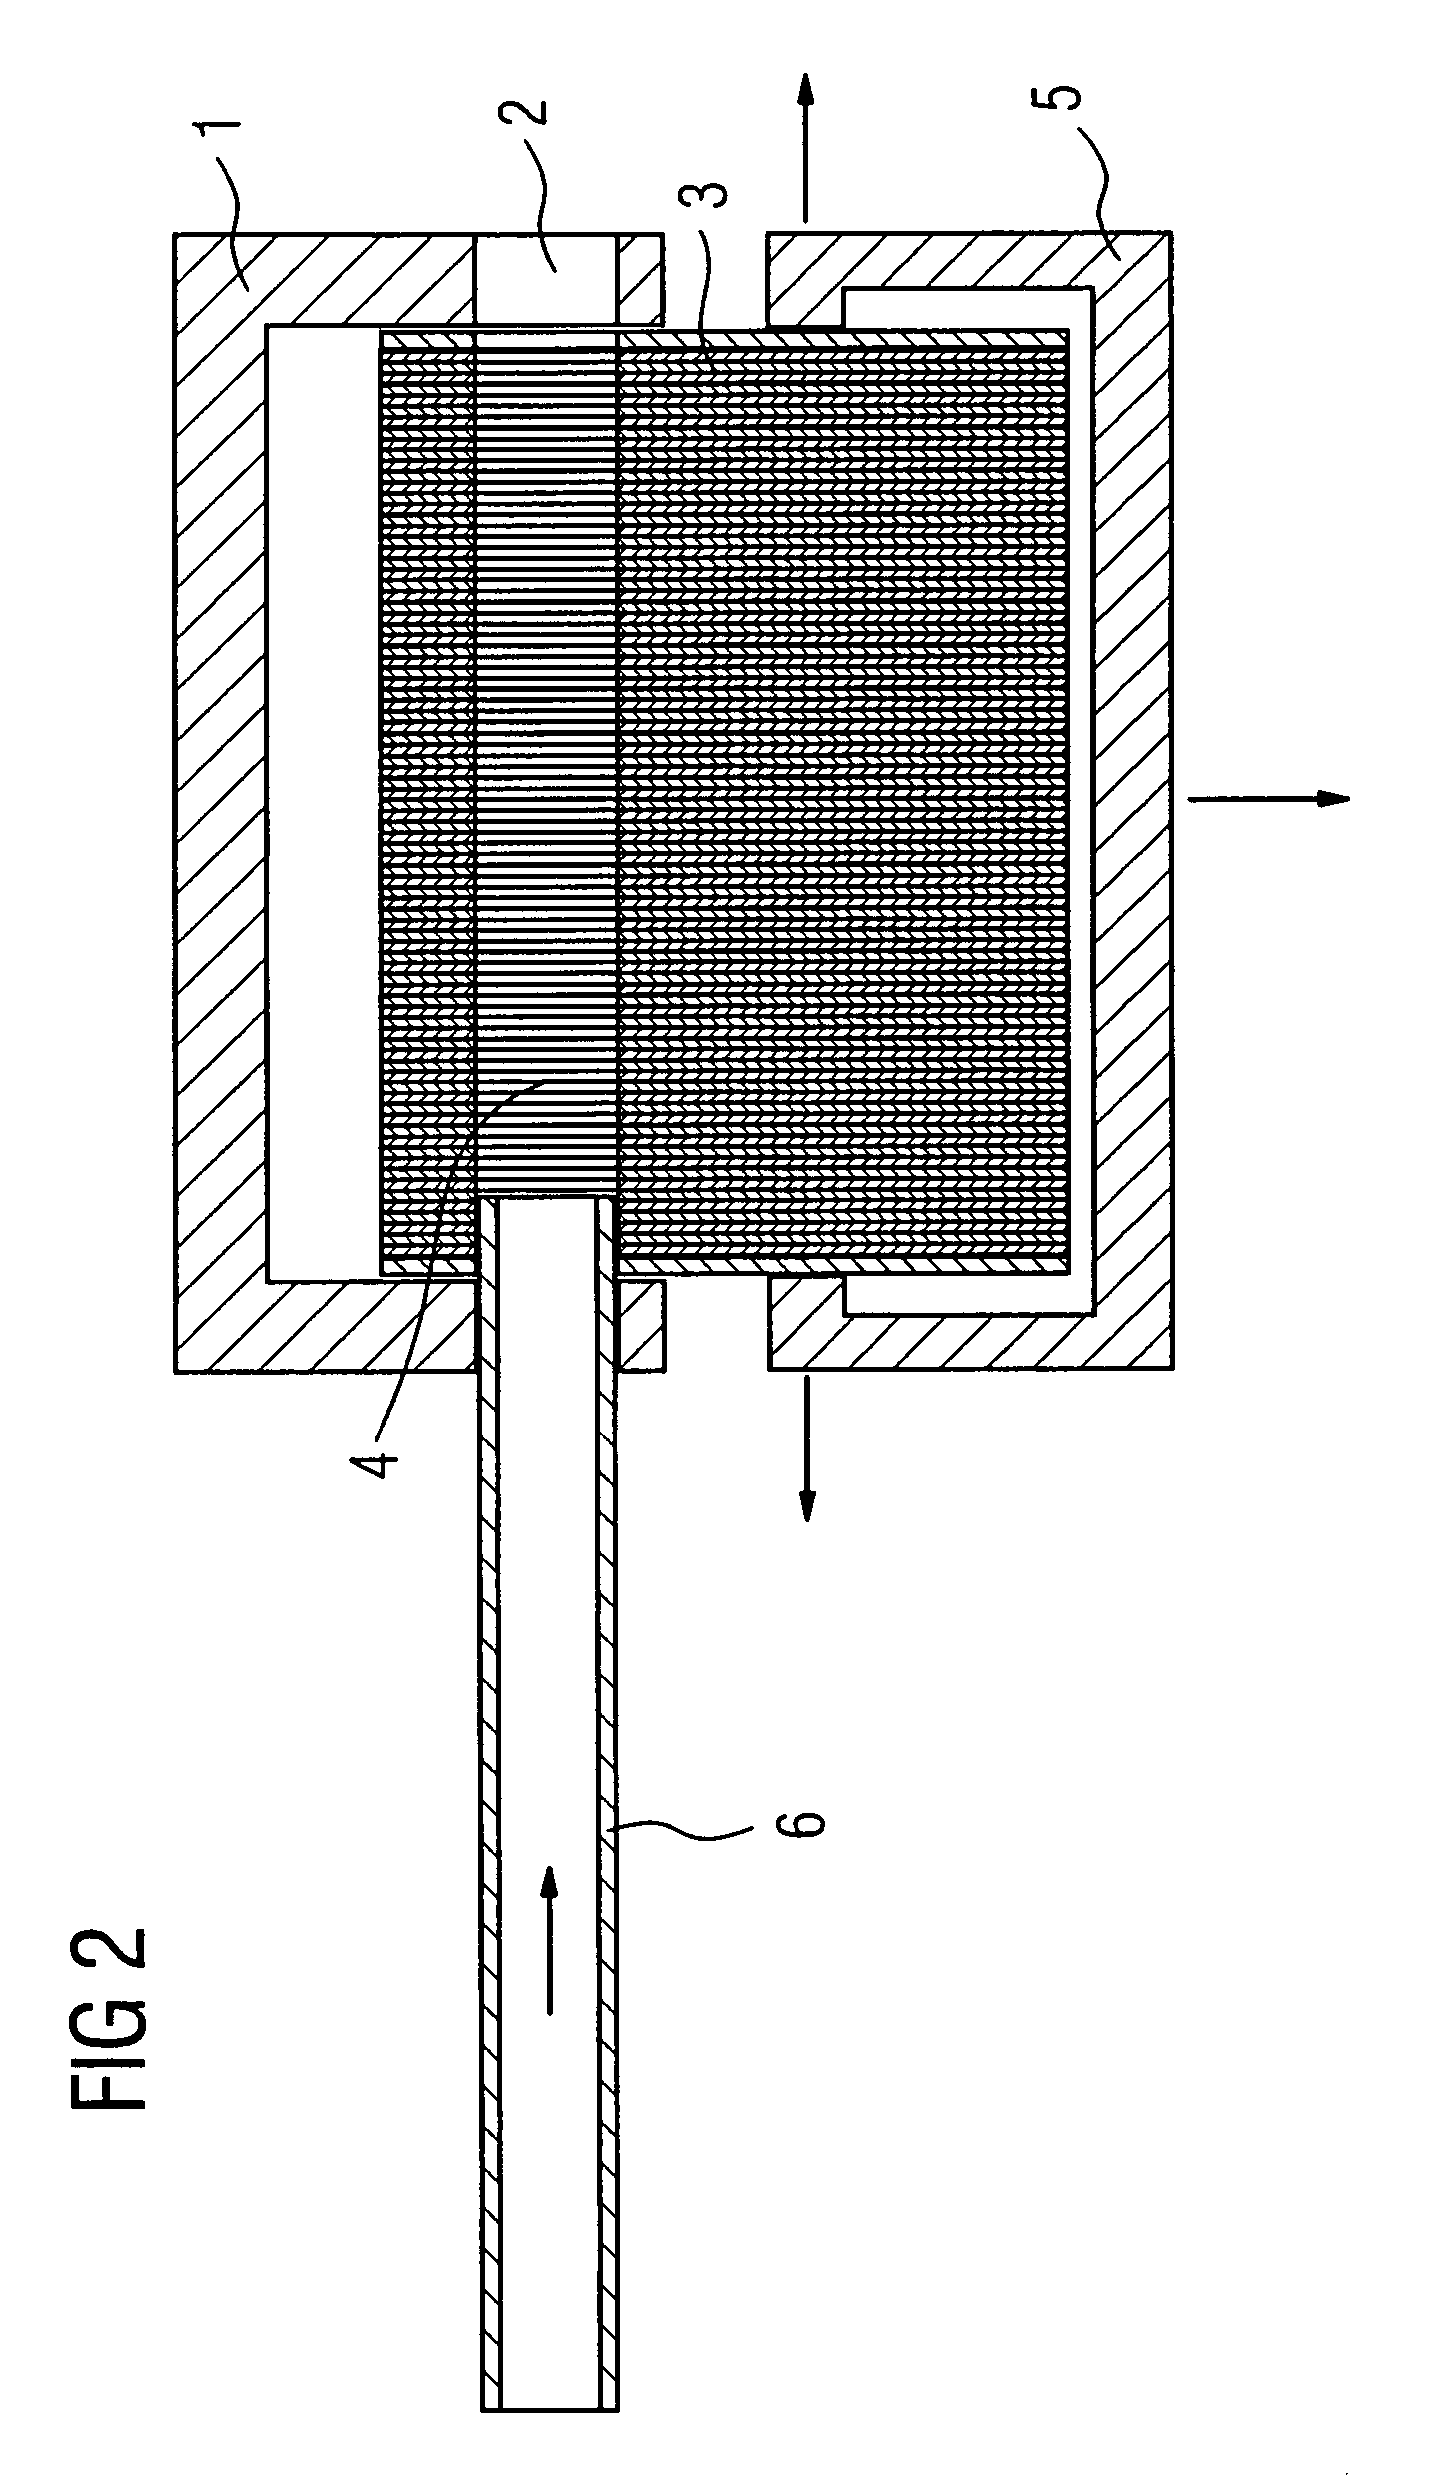 Method for securing a laminated core for the stator winding of a linear motor to the track